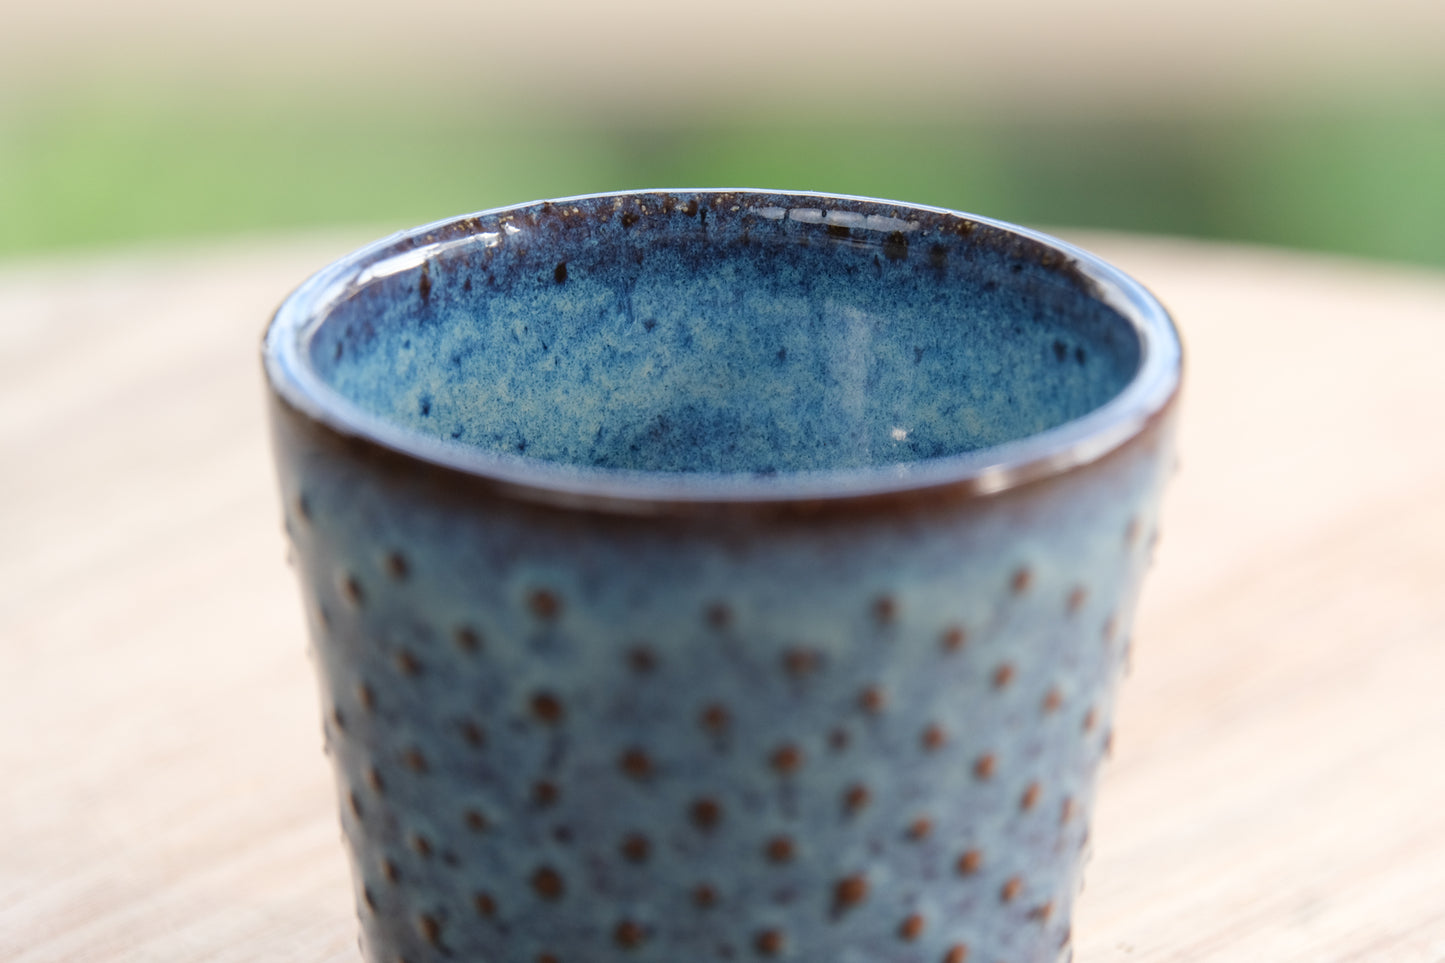 Espresso Cup - Lots of spots in blue